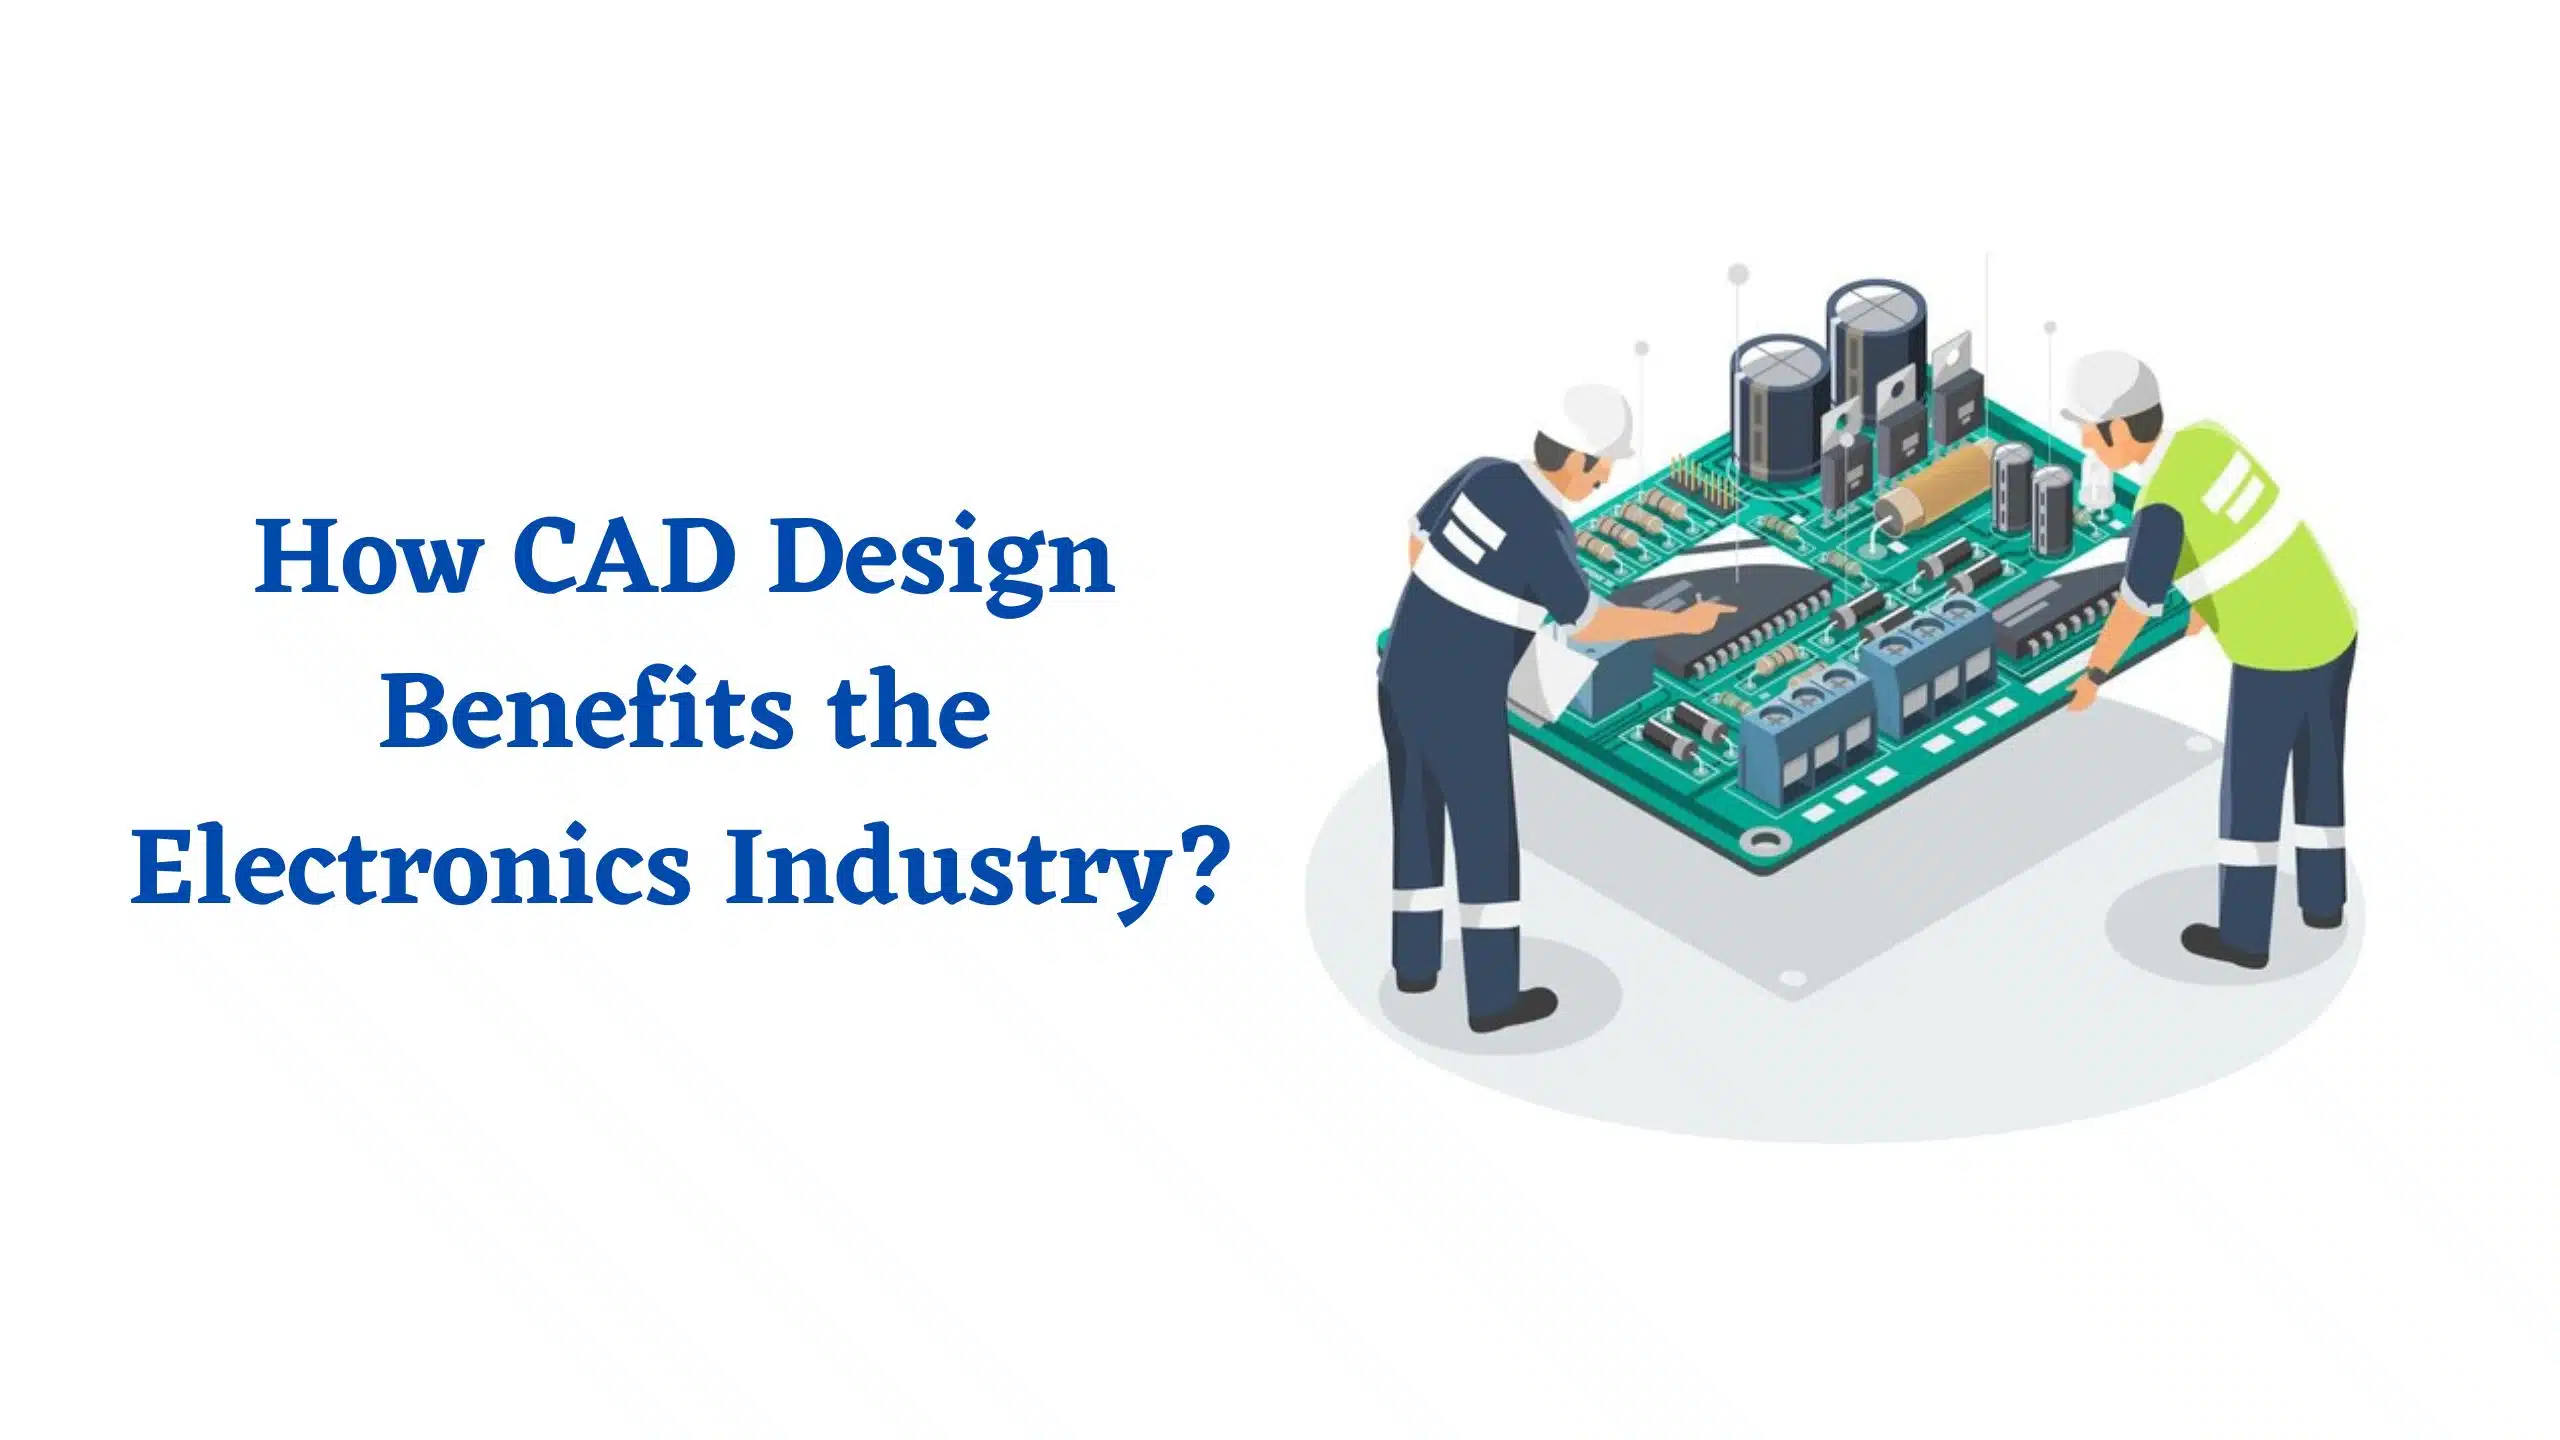 How CAD Design Benefits the Electronics Industry